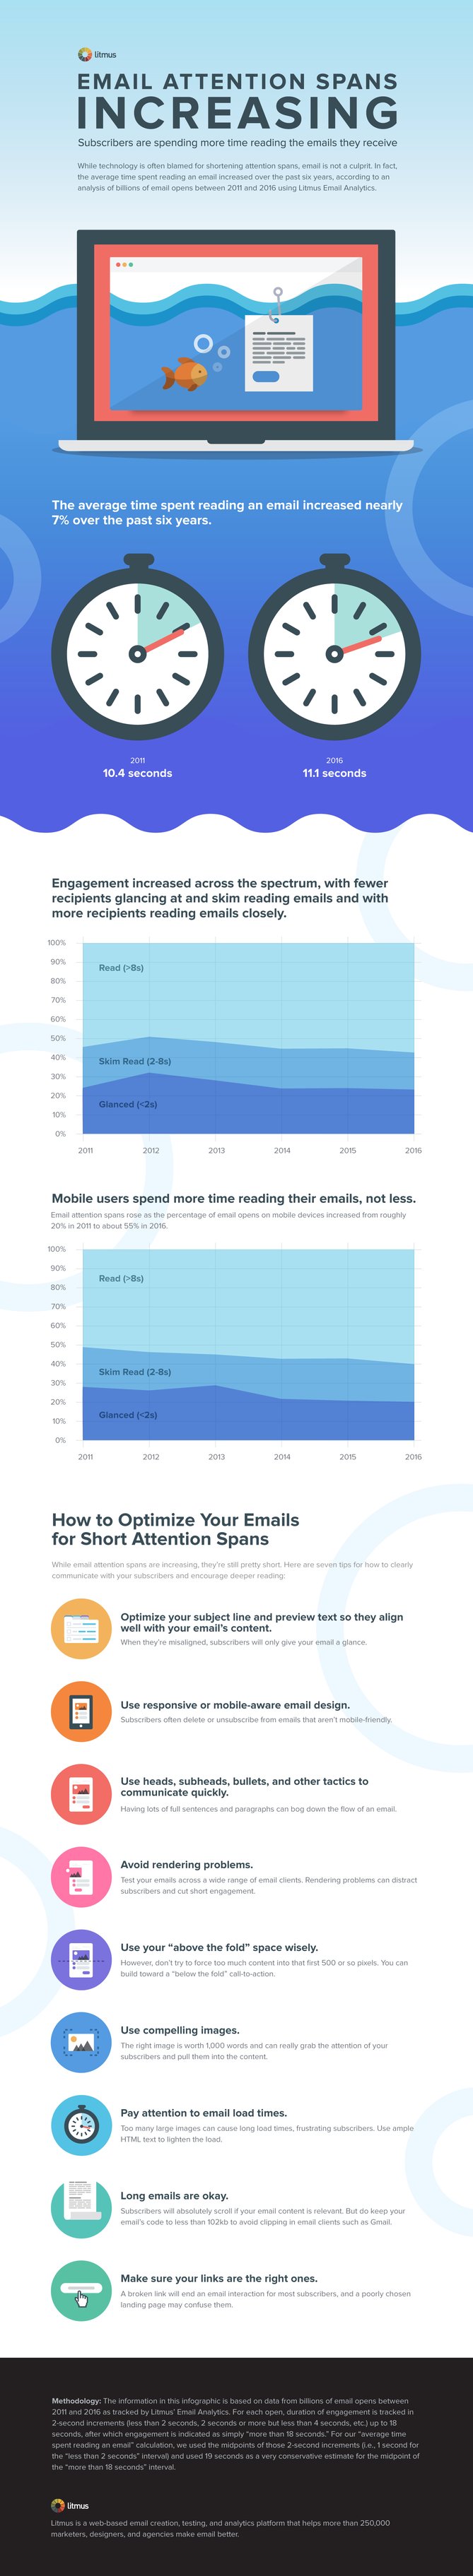 email-attention-spans-increasing-design.png